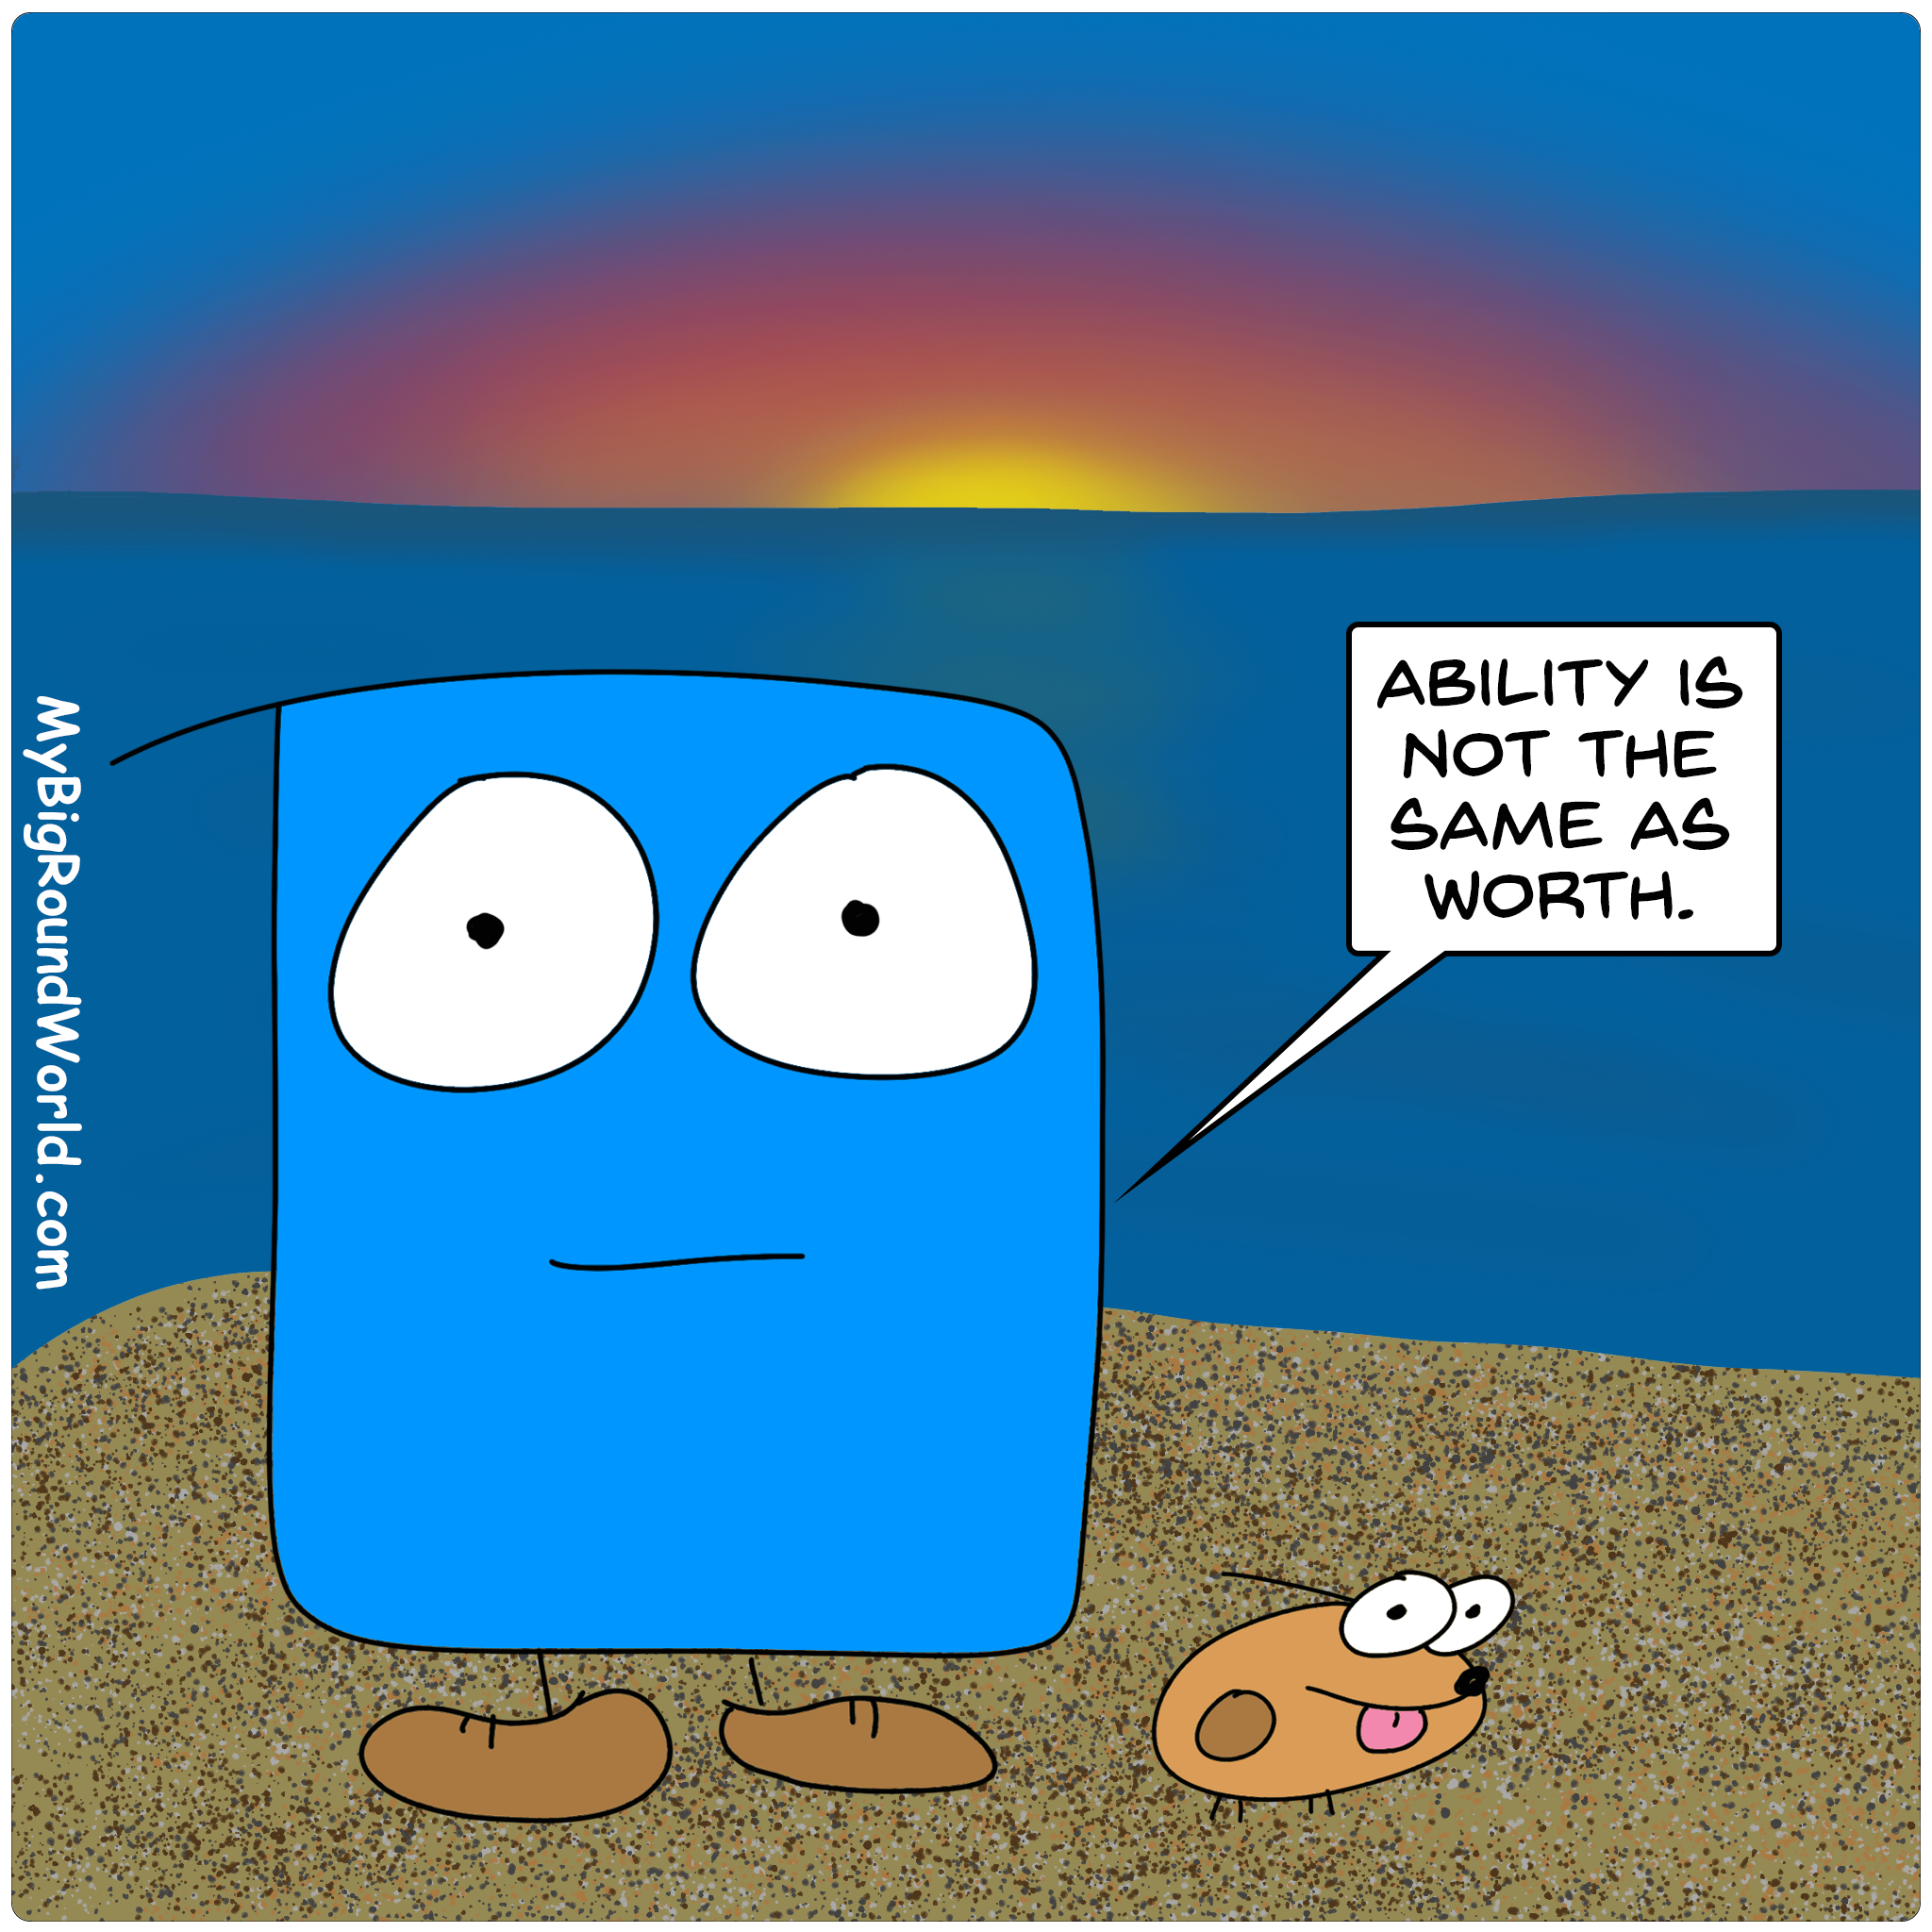 Blue and Spot on a darkened morning beach with the sun poking over the horizon. Blue says, "Ability is not the same as worth."